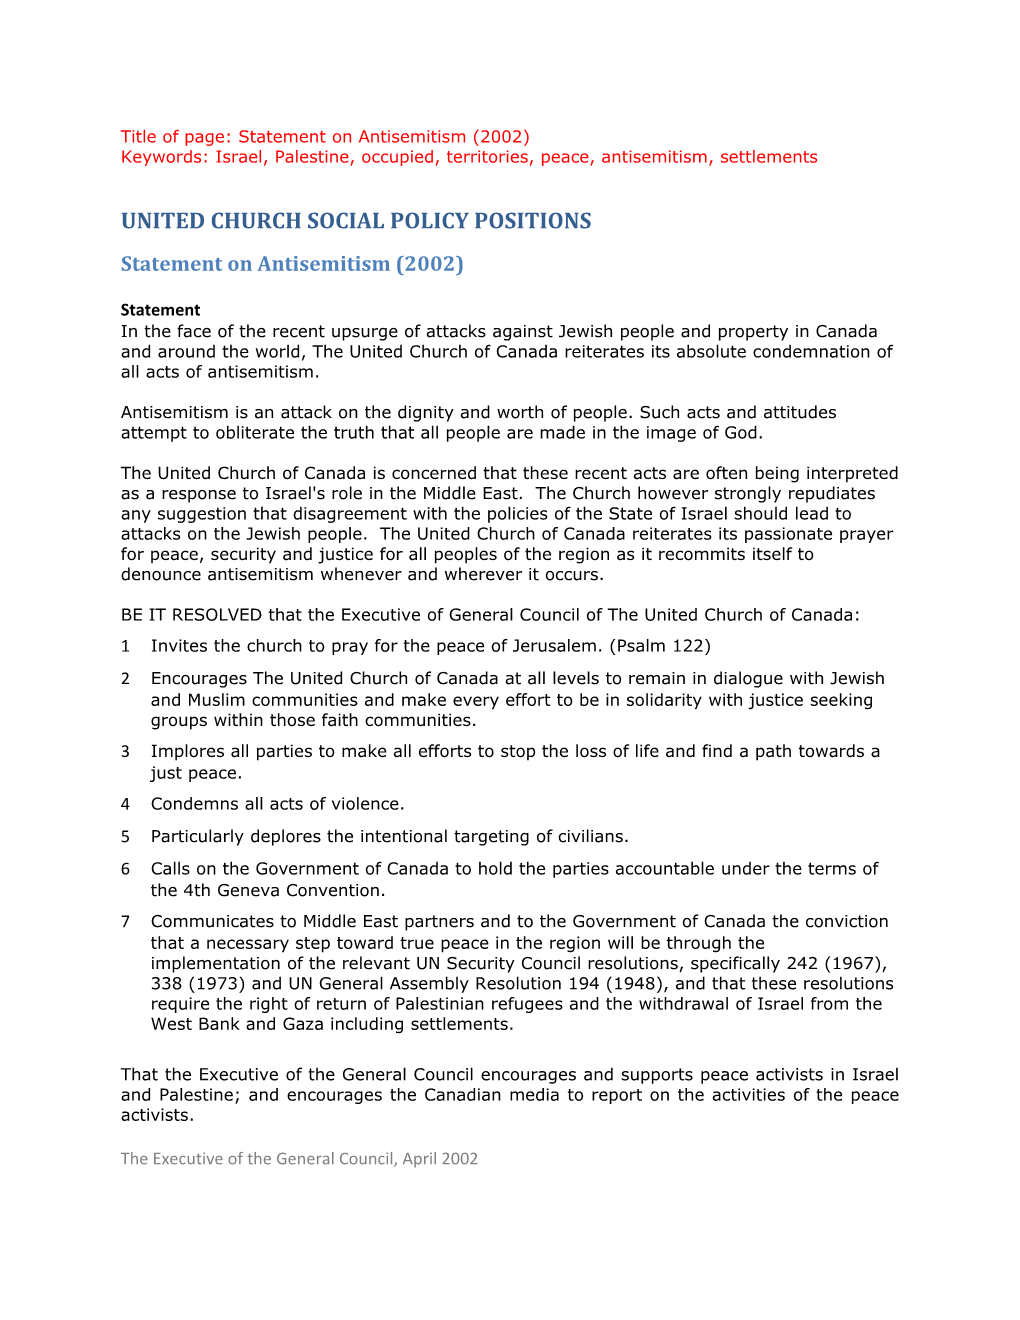 United Church Social Policy Positions